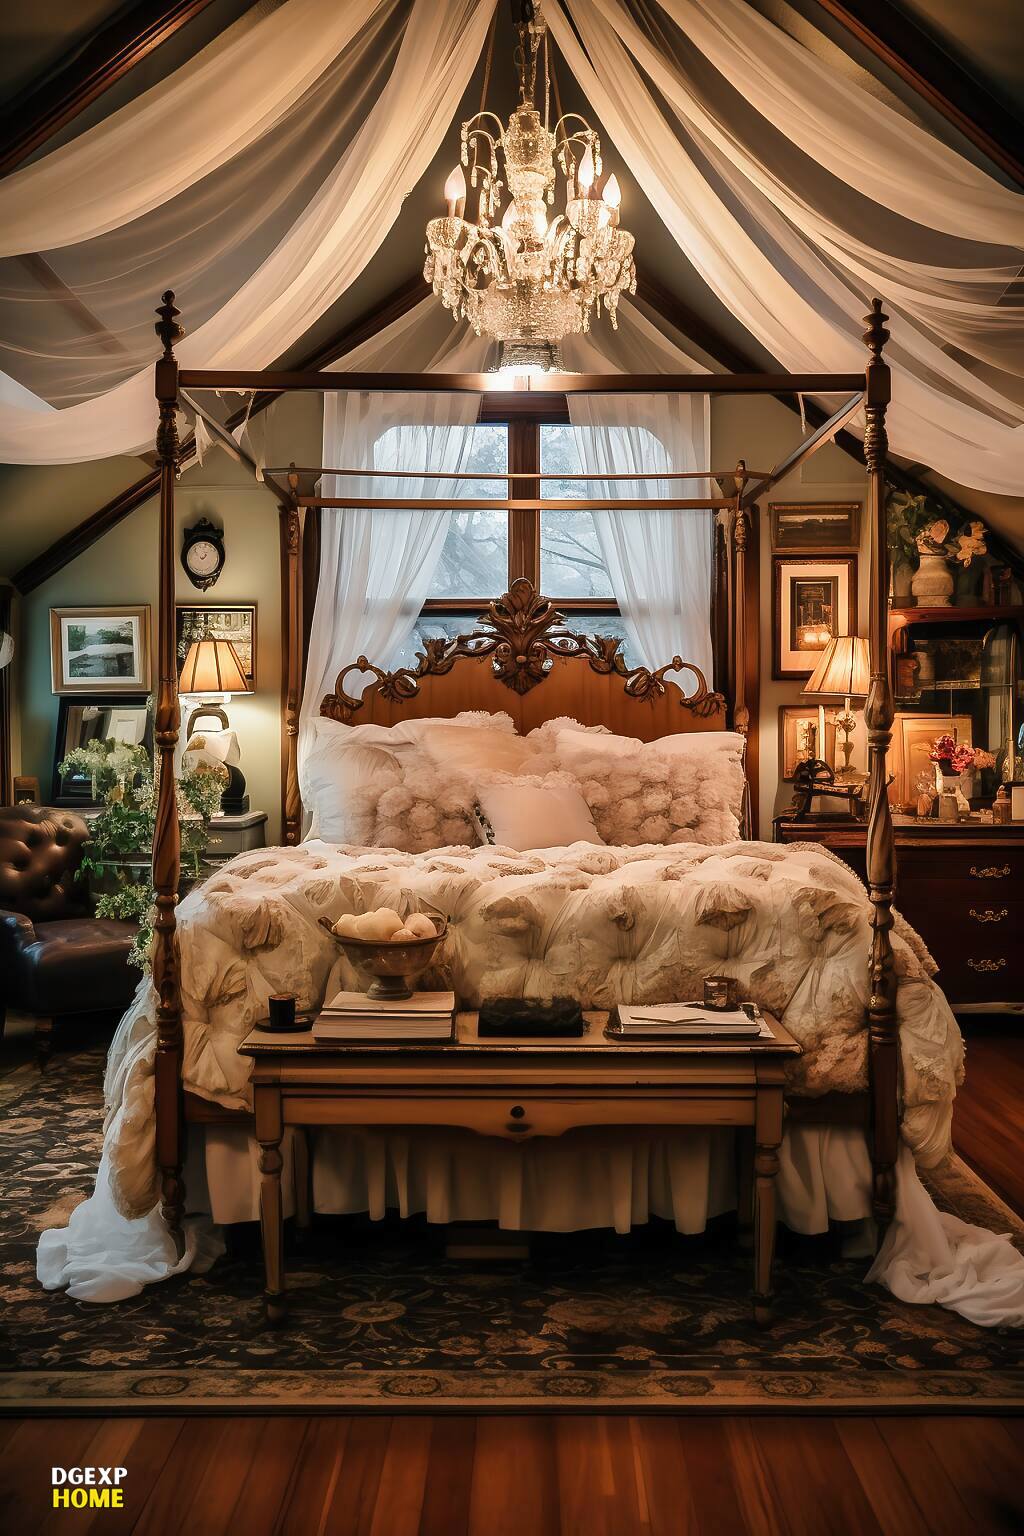 Vintage-Inspired Farmhouse Bedroom With Floral Patterns And Cottagecore Elegance.